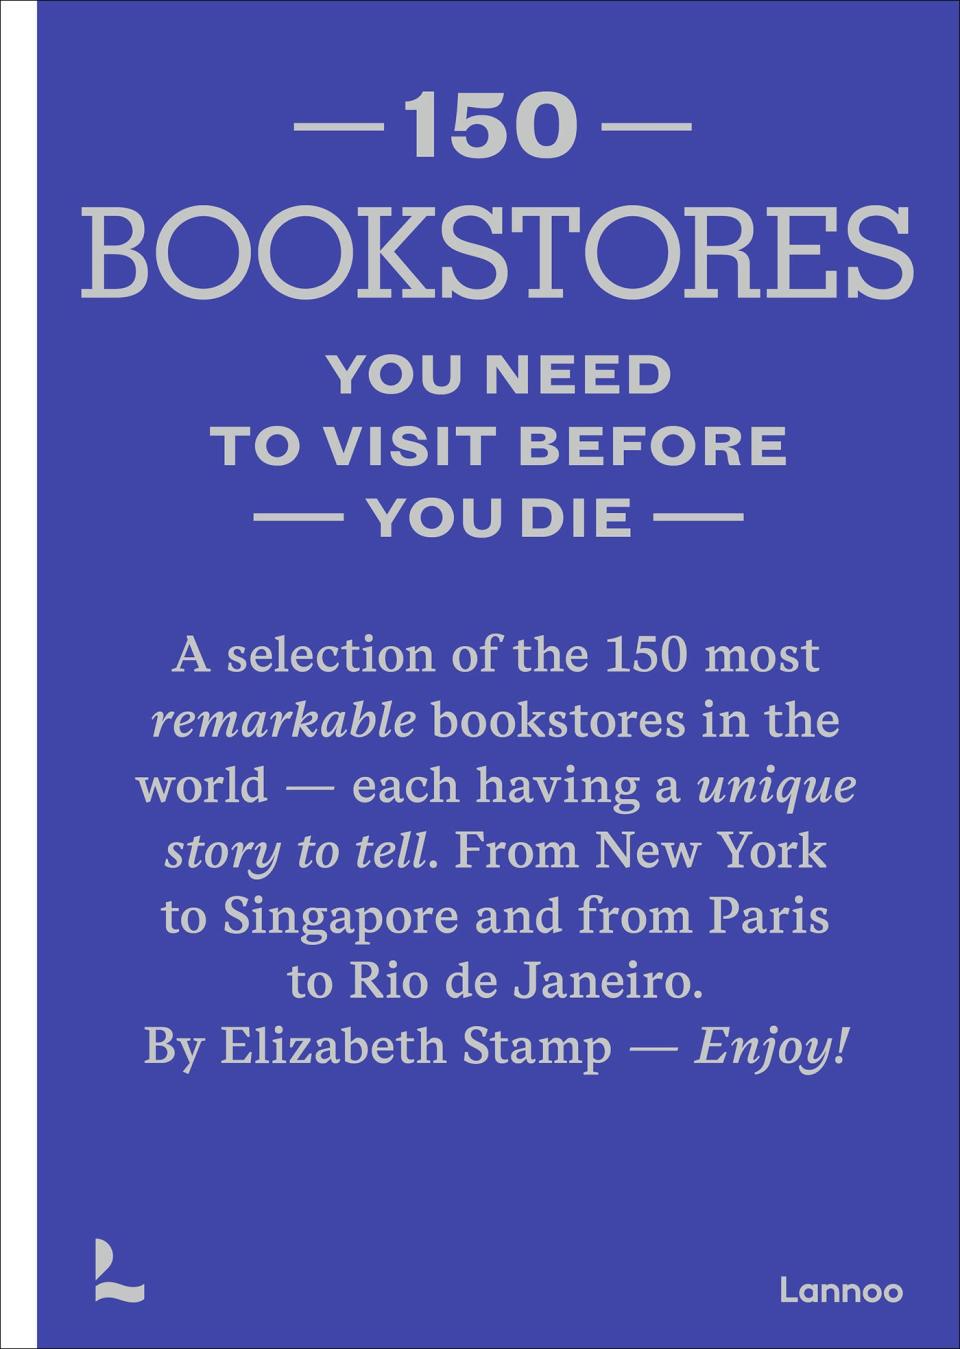 "150 Bookstores You Need to Visit Before You Die"